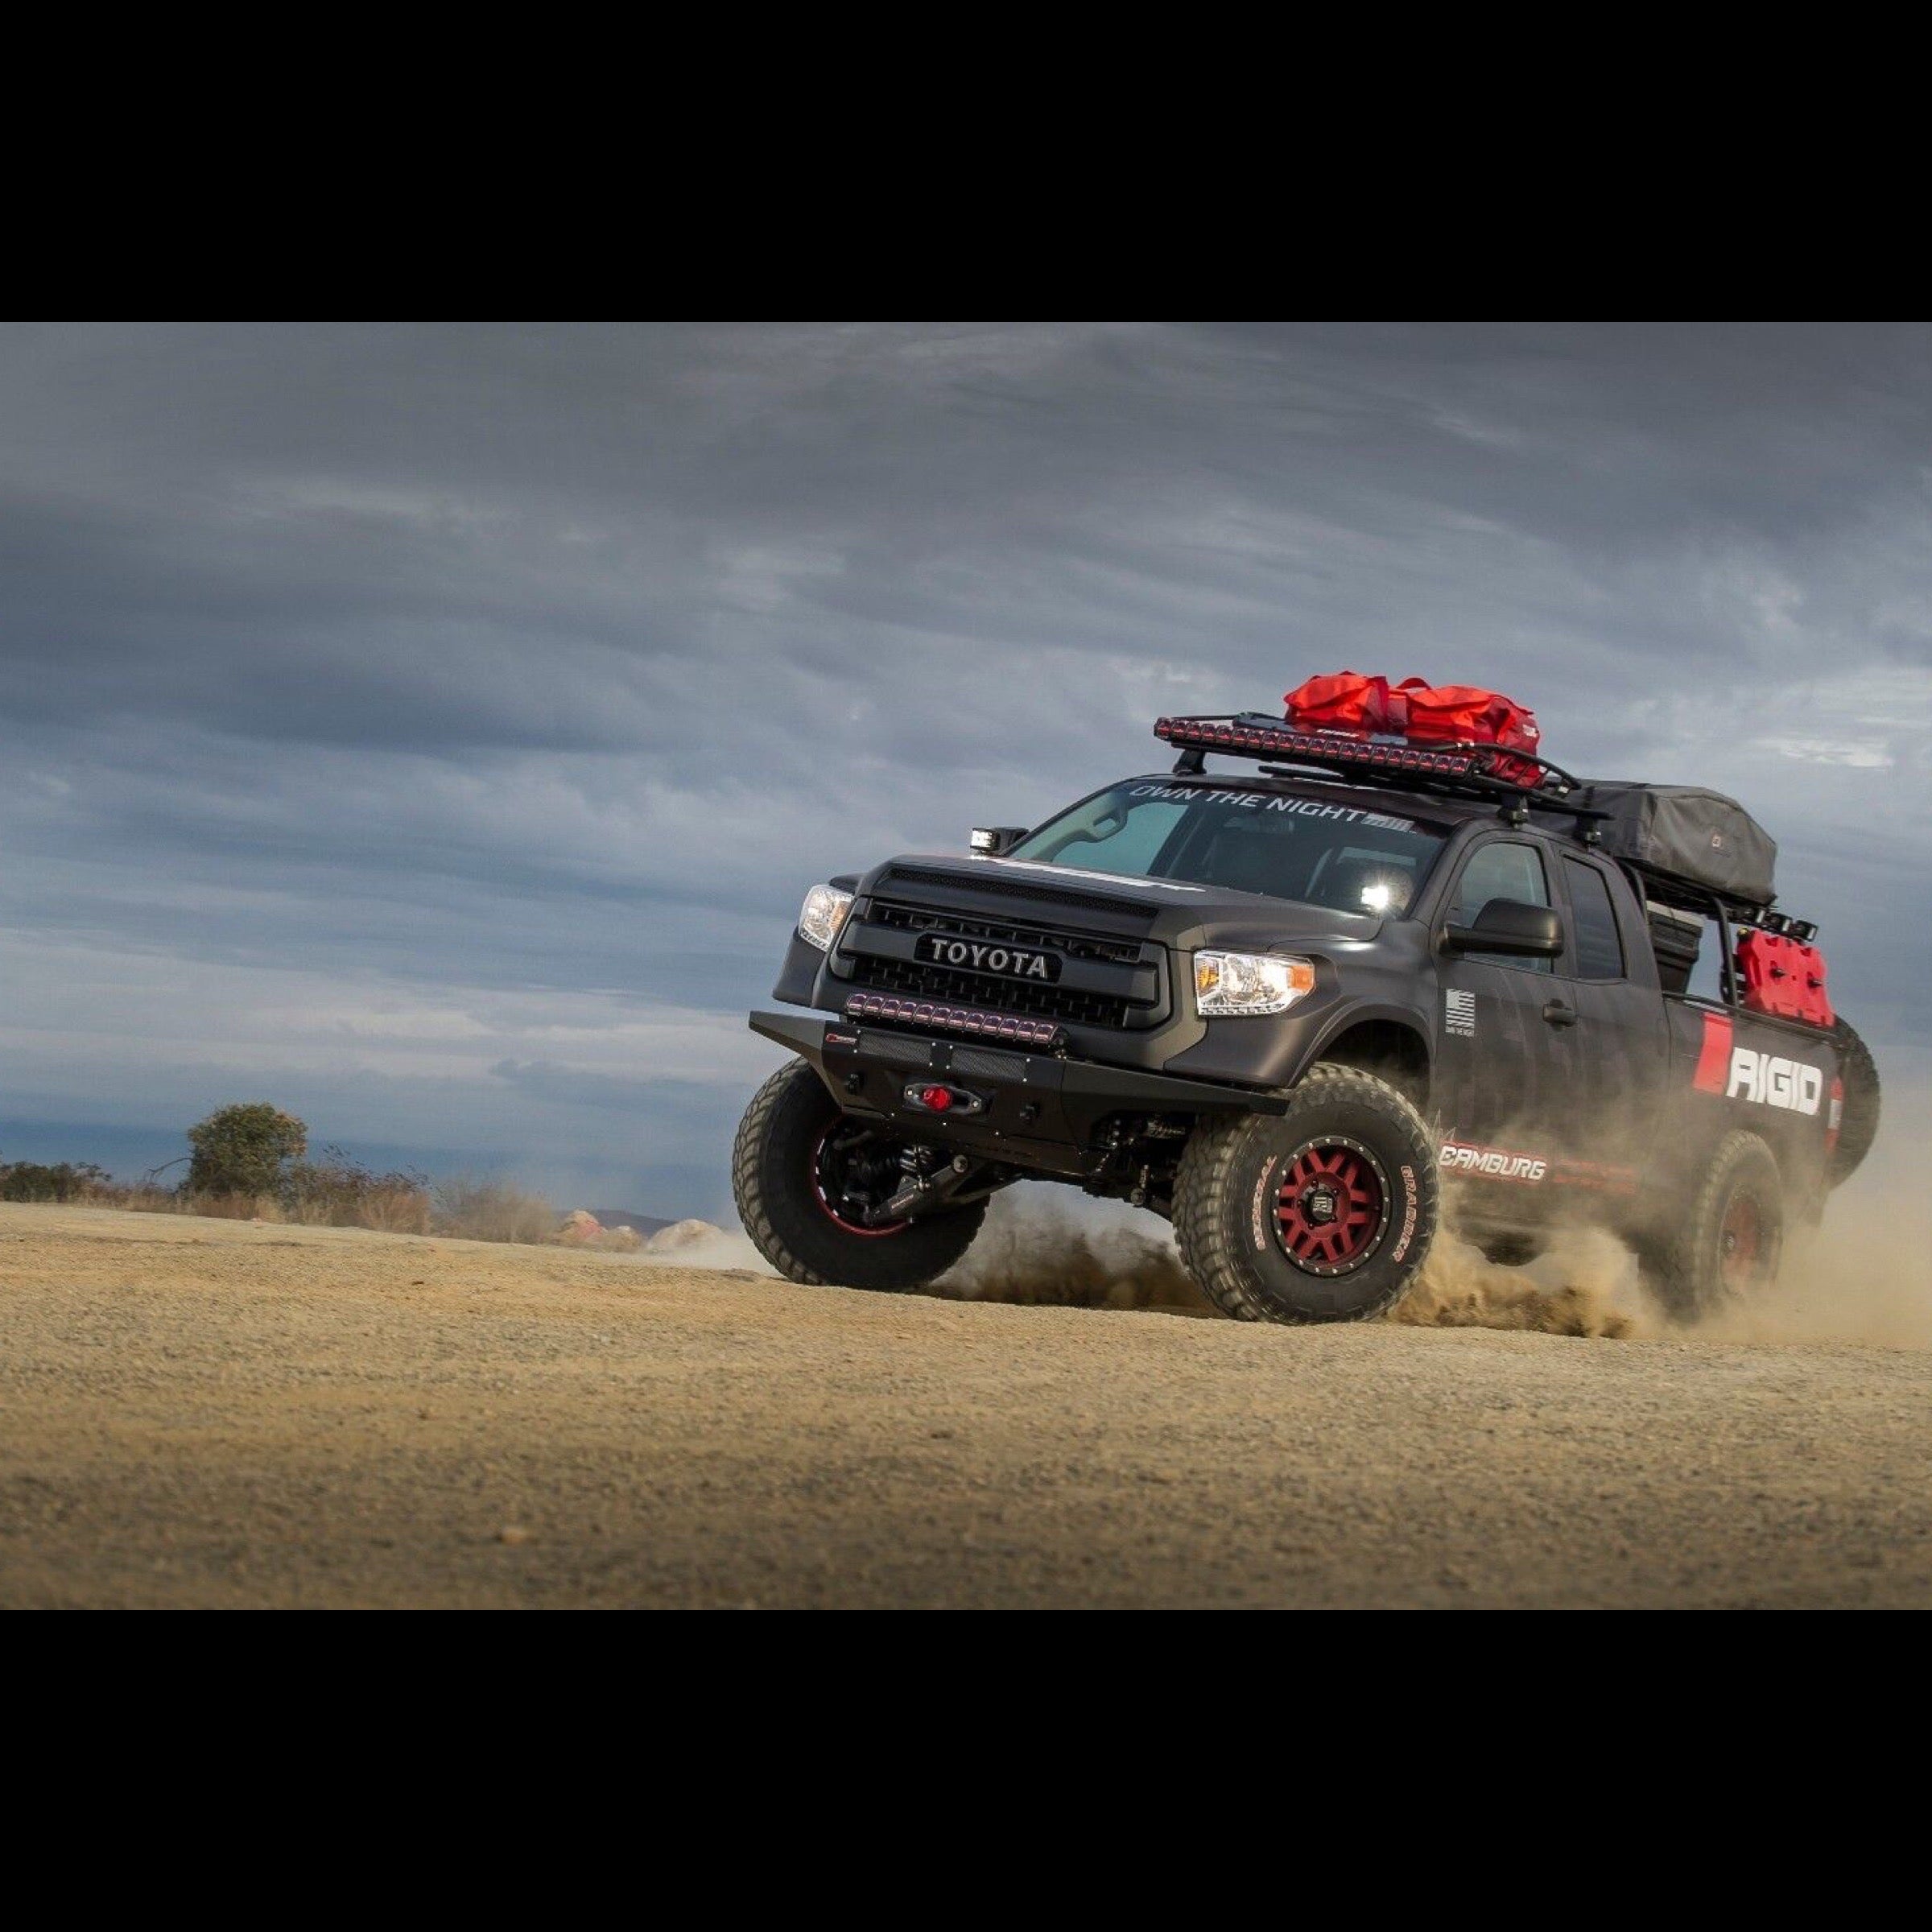 Rigid Industries Toyota Tundra spinning tire on a dirt road with rigid lights on